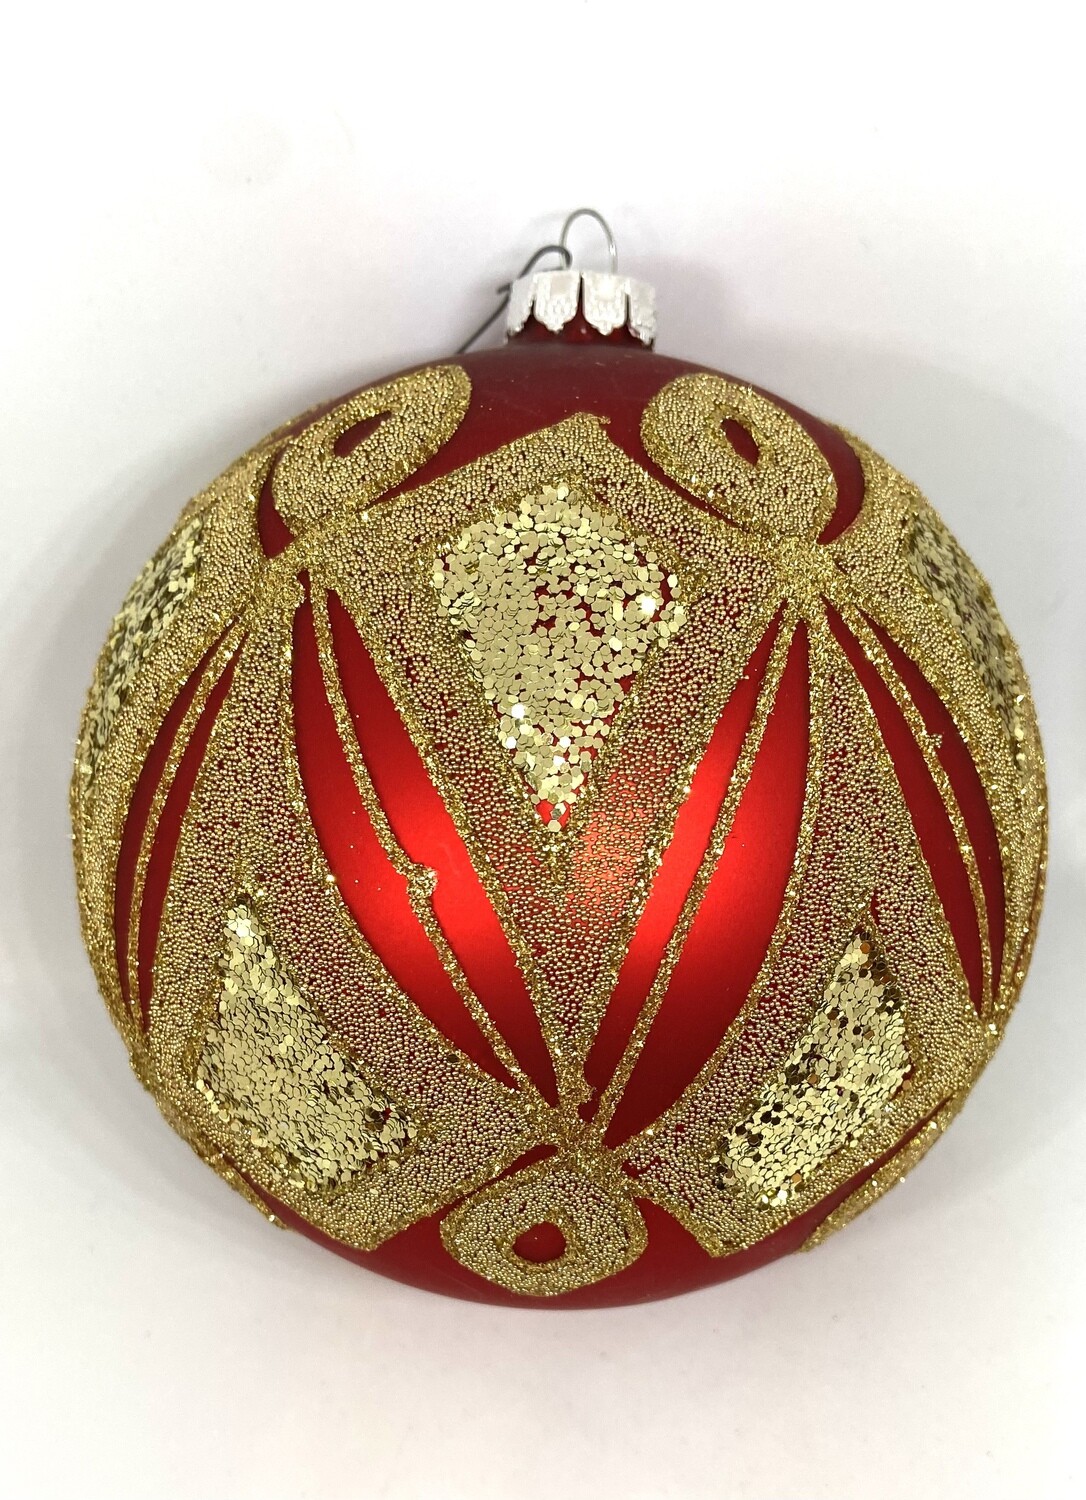 Large 6” Red Ball Ornament with Glitter Design